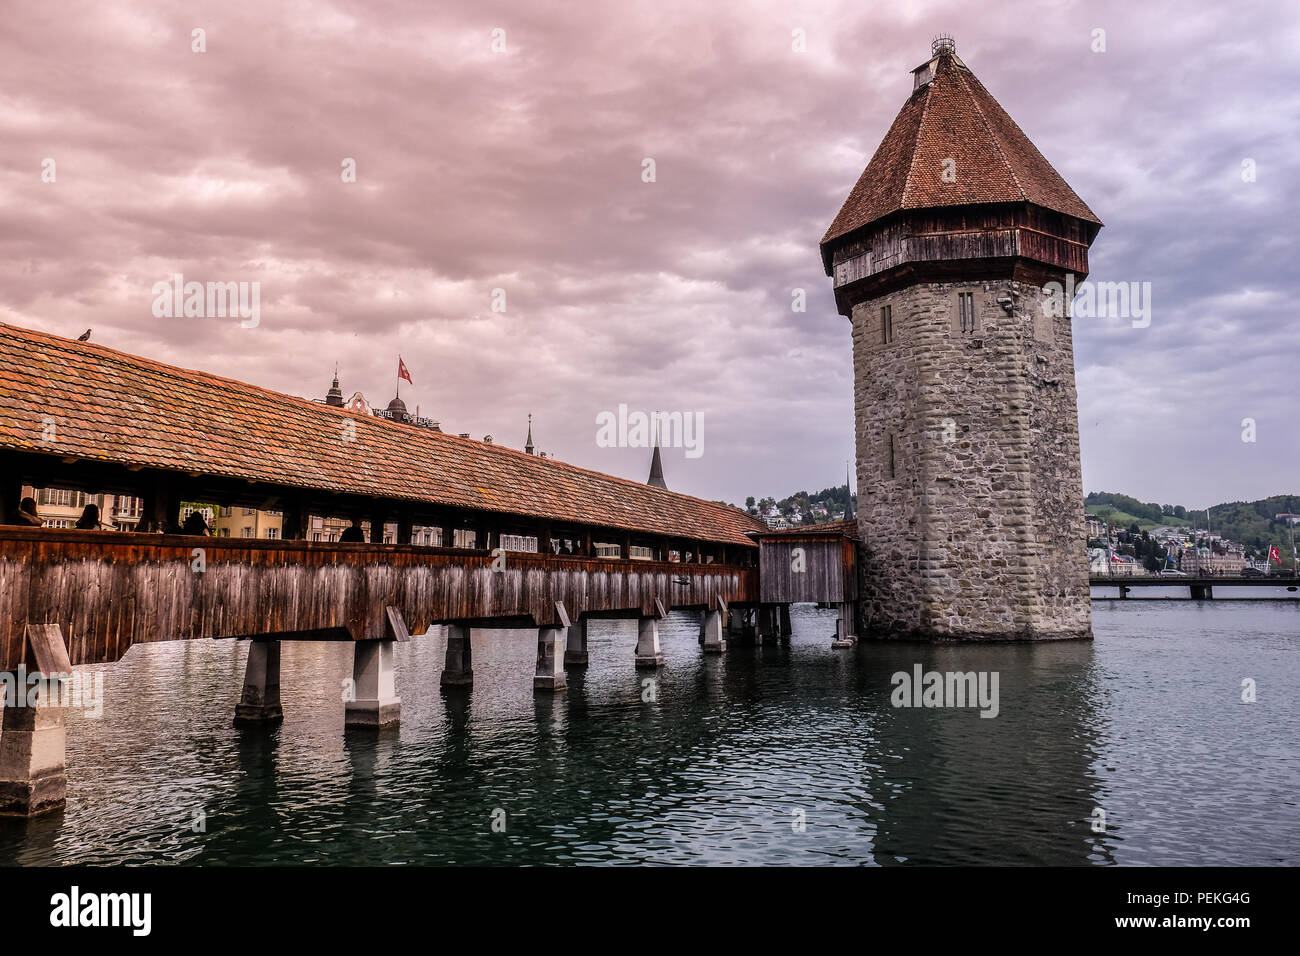 Landscape view of the Kapellbrücke (chapel Bridge), in the city of Luzern in Switzerland, with mountains in the background Stock Photo